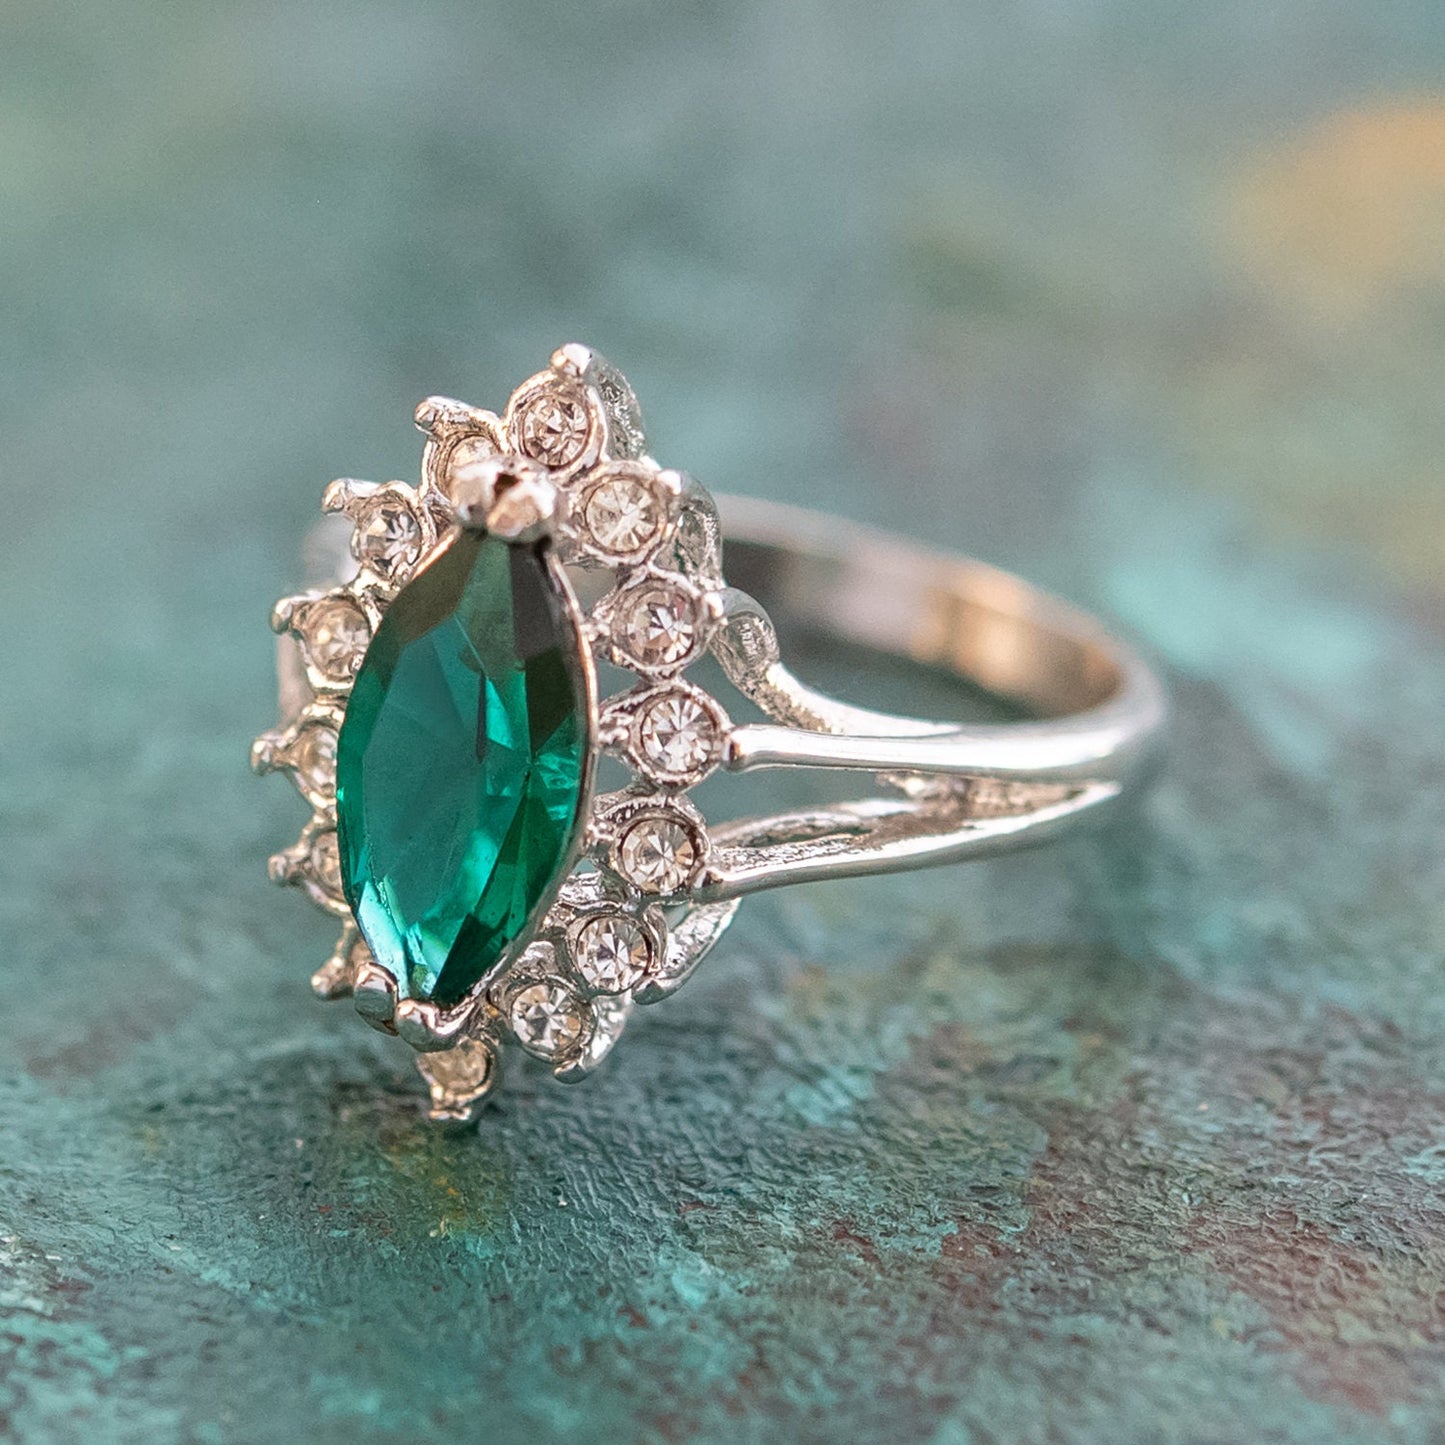 Vintage Emerald and Clear Swarovski Crystals 18k White Gold Electroplated Ring May Birthstone R1891 Size 8